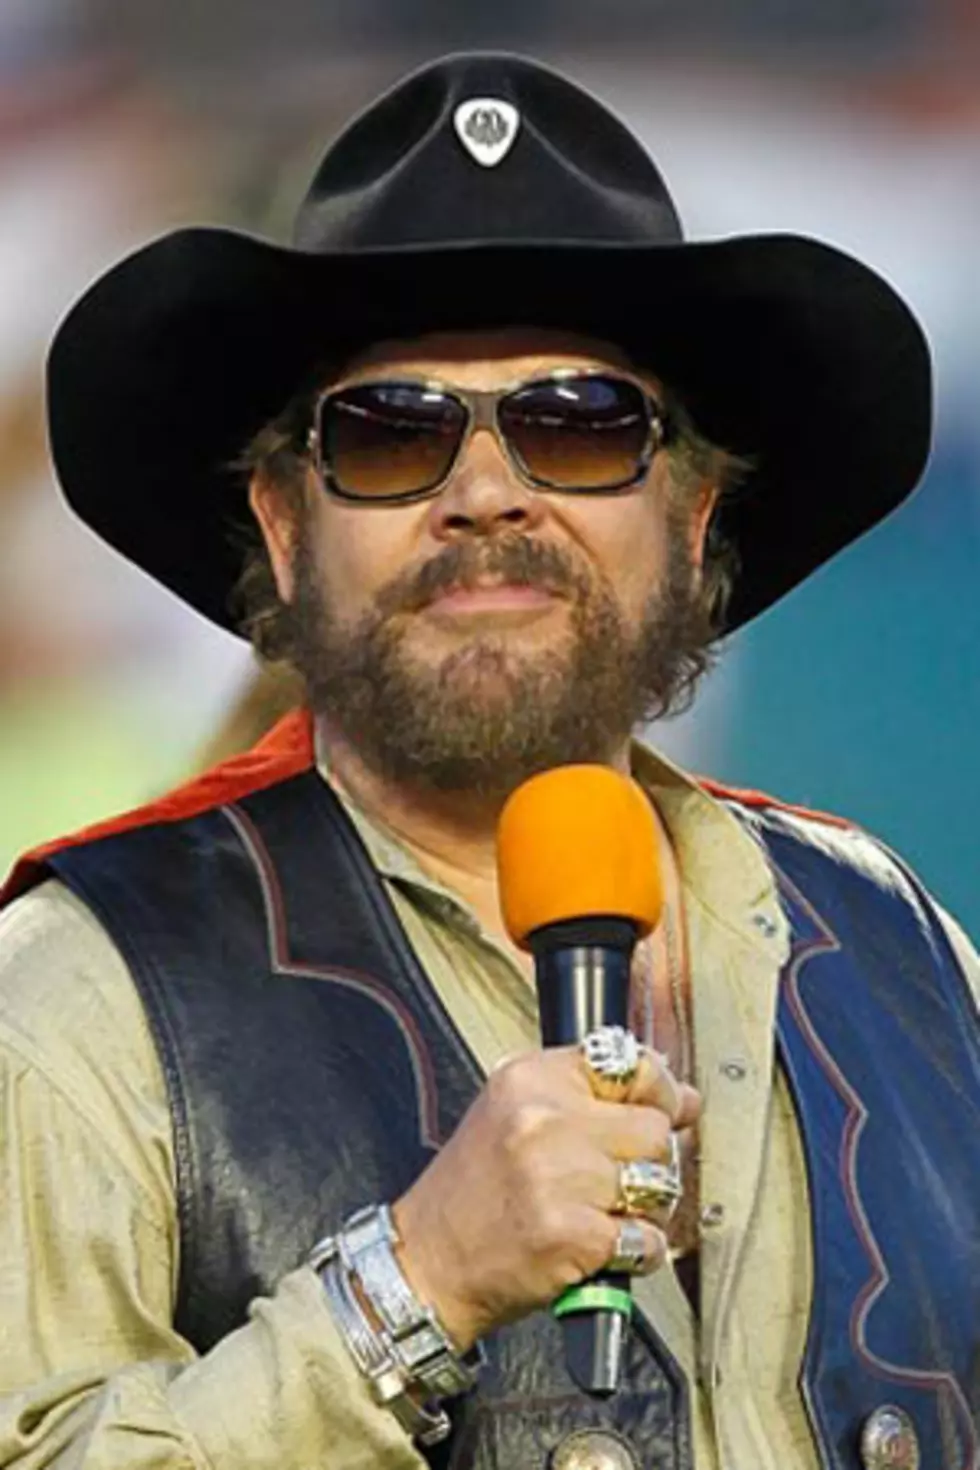 Top 10 News Stories of 2011: Hank Williams Jr. Pulled From TV After Comparing Obama to Hitler